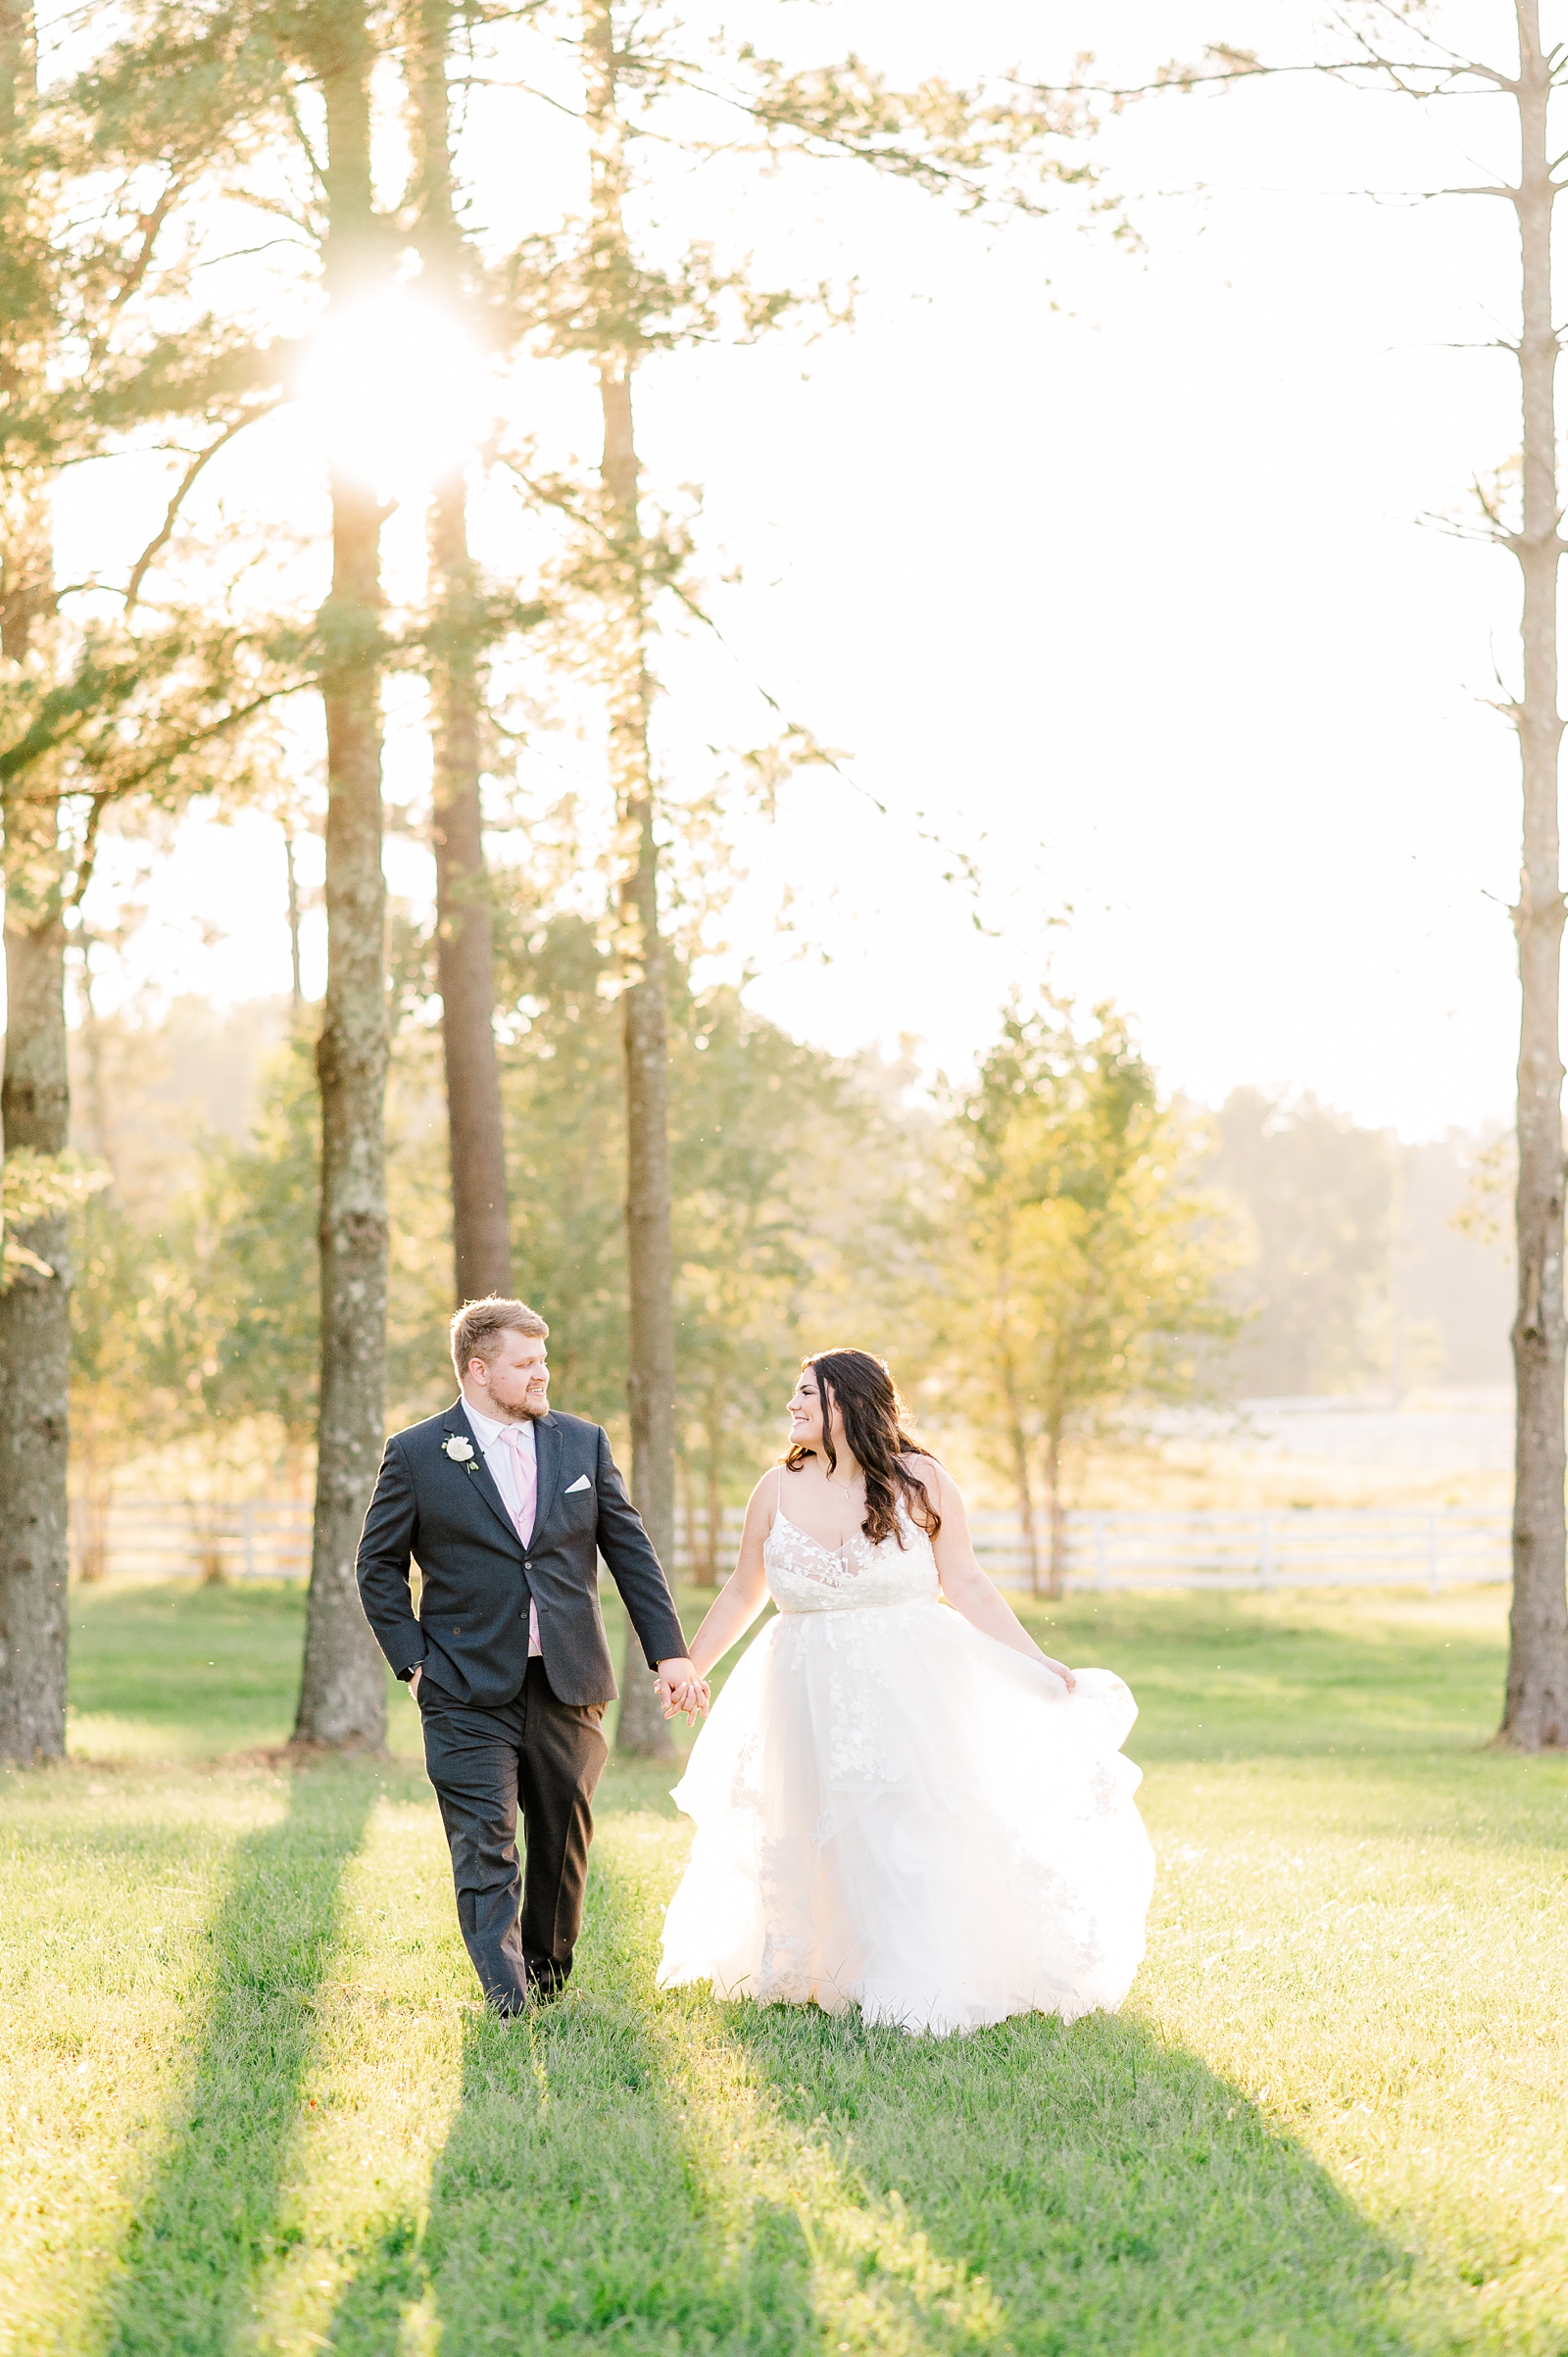 Bride and Groom Sunset Portraits Running through Field at a Cumberland Estate Wedding. Photography by Virginia Wedding Photographer Kailey Brianne Photography. 